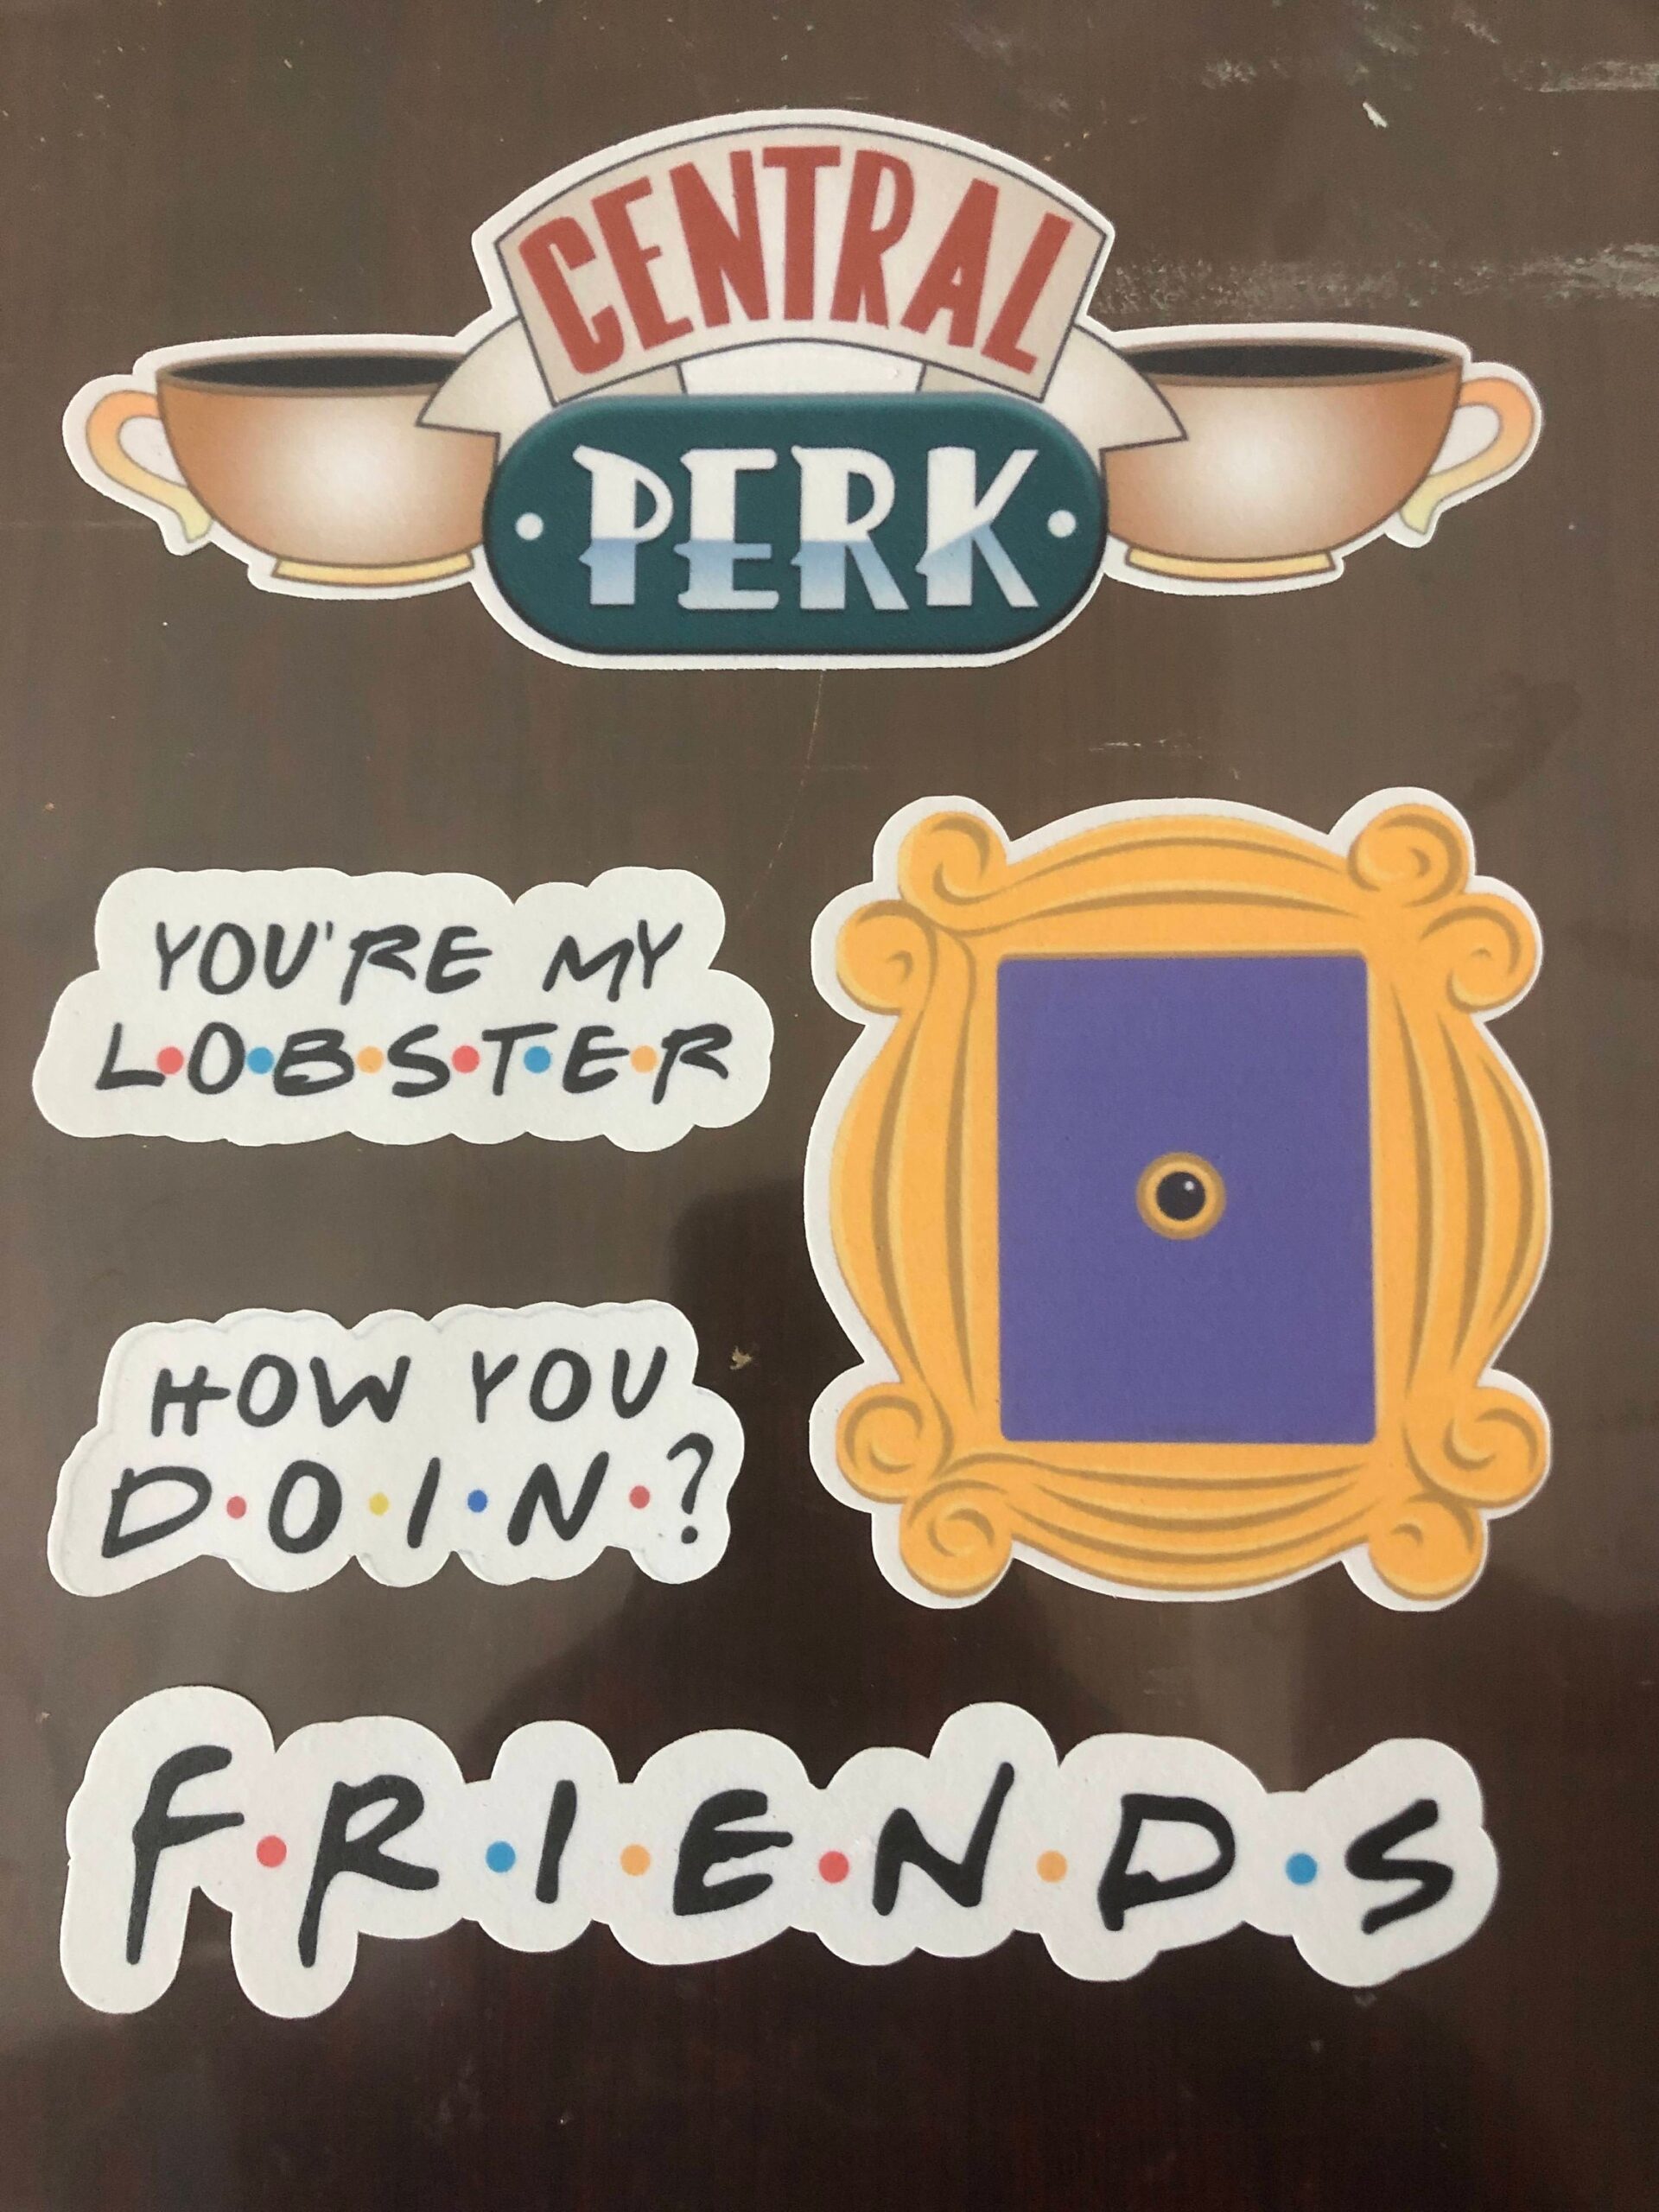 Coffee Cup - Central Perk Logo - CleanPNG / KissPNG